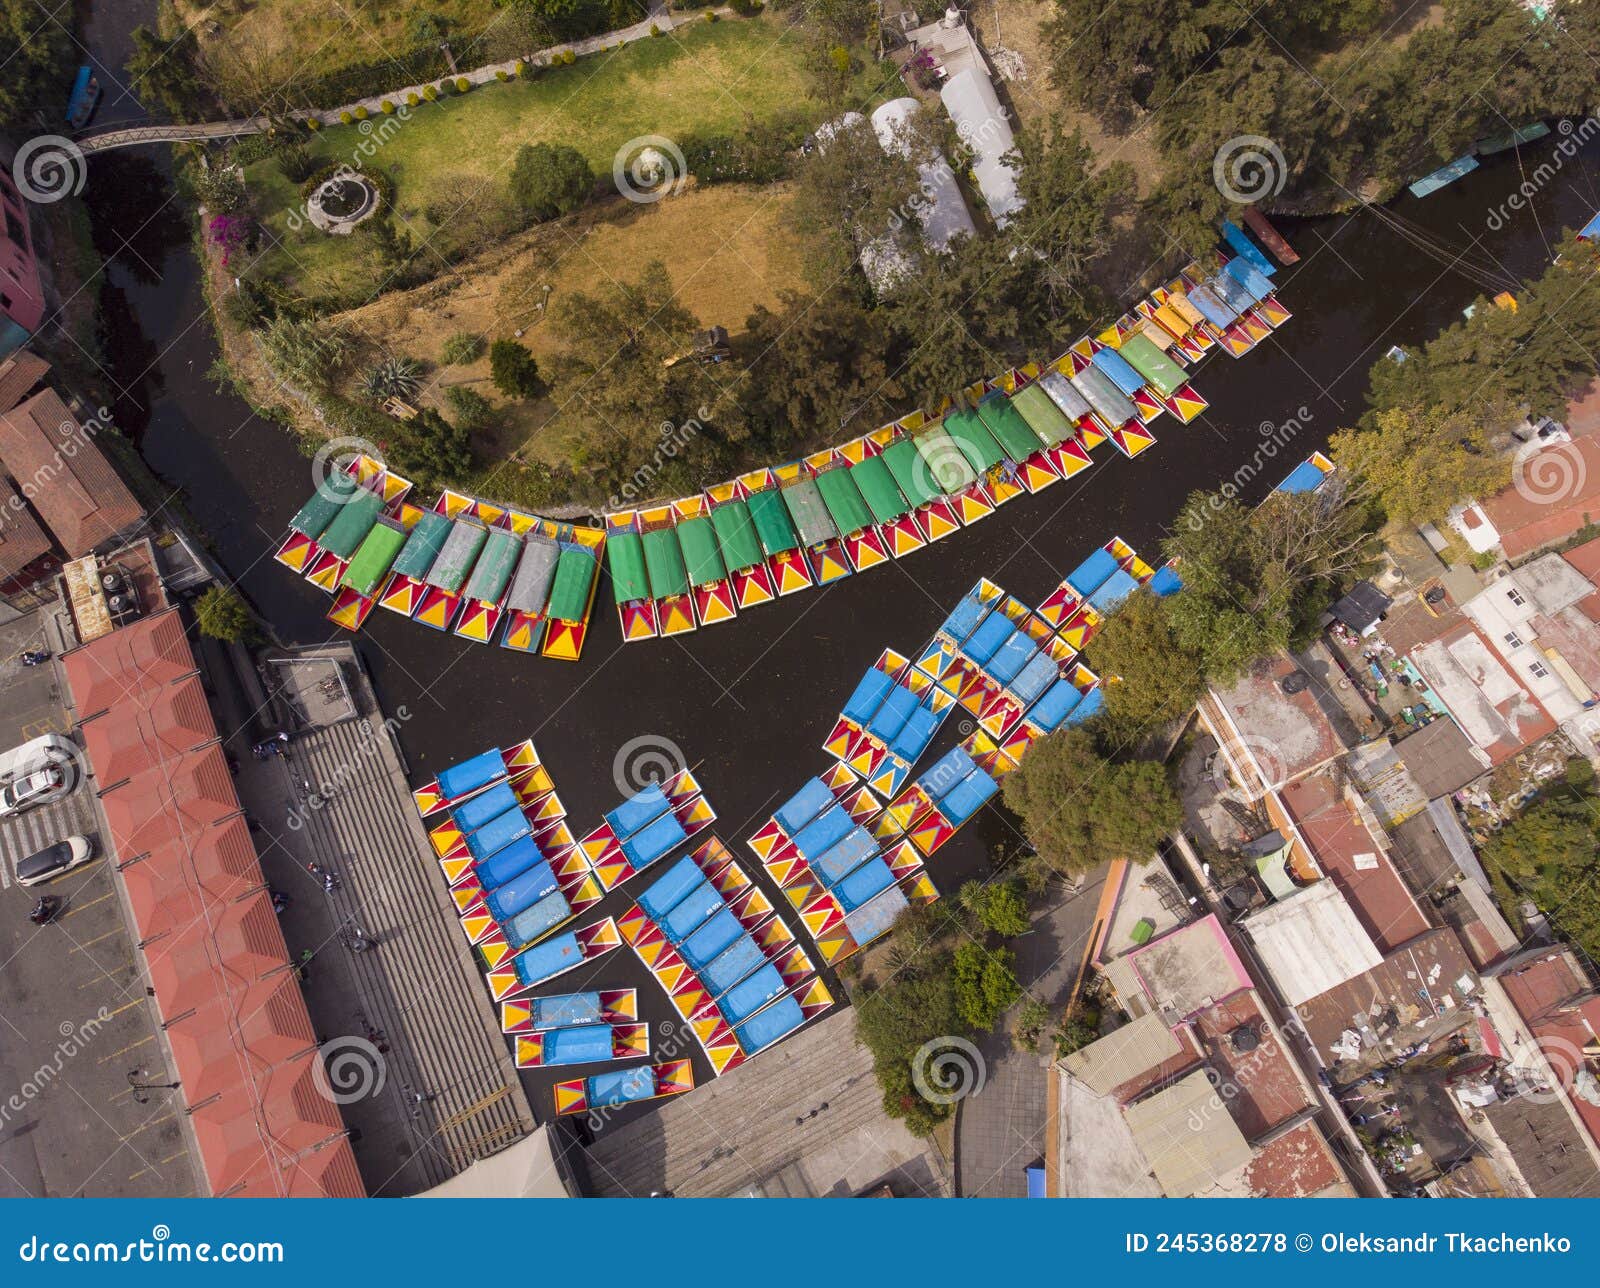 aerial drone shot of colorful boats in xochimilco. tours by cannels with floating gardens in mexico city cdmx, mexico